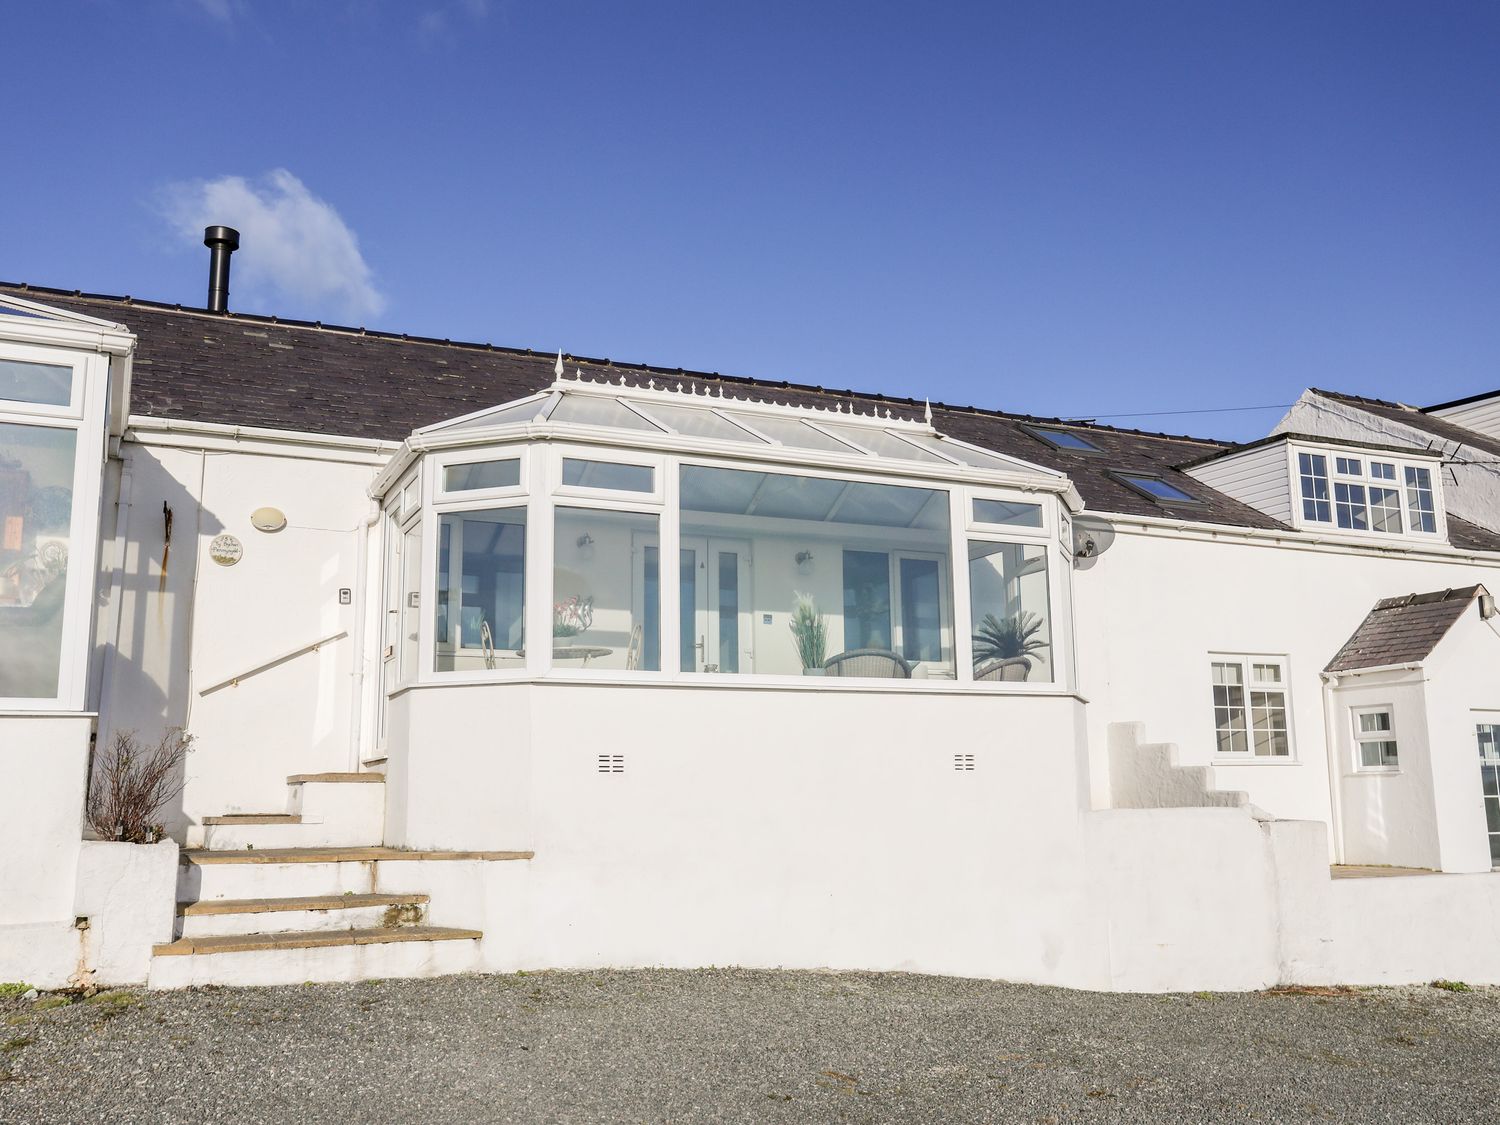 5 Porthdafarch South Cottages - Anglesey - 1042998 - photo 1